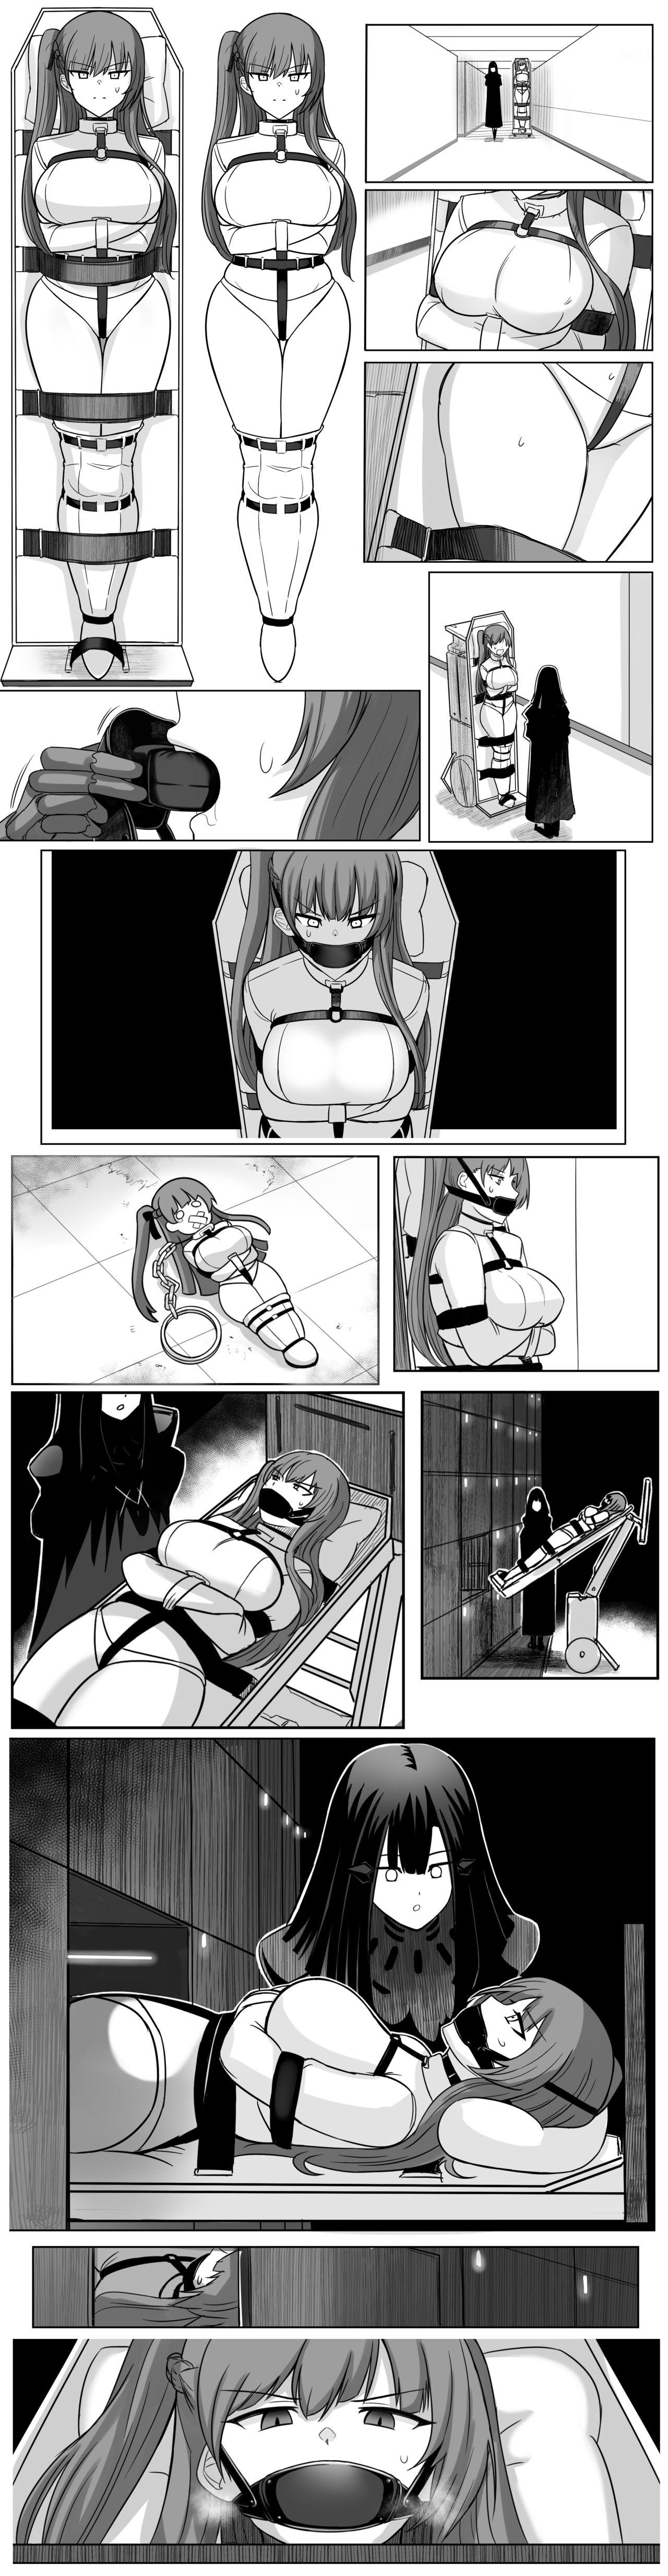 Dick Lost Dolls - Girls frontline Porno 18 - Page 10